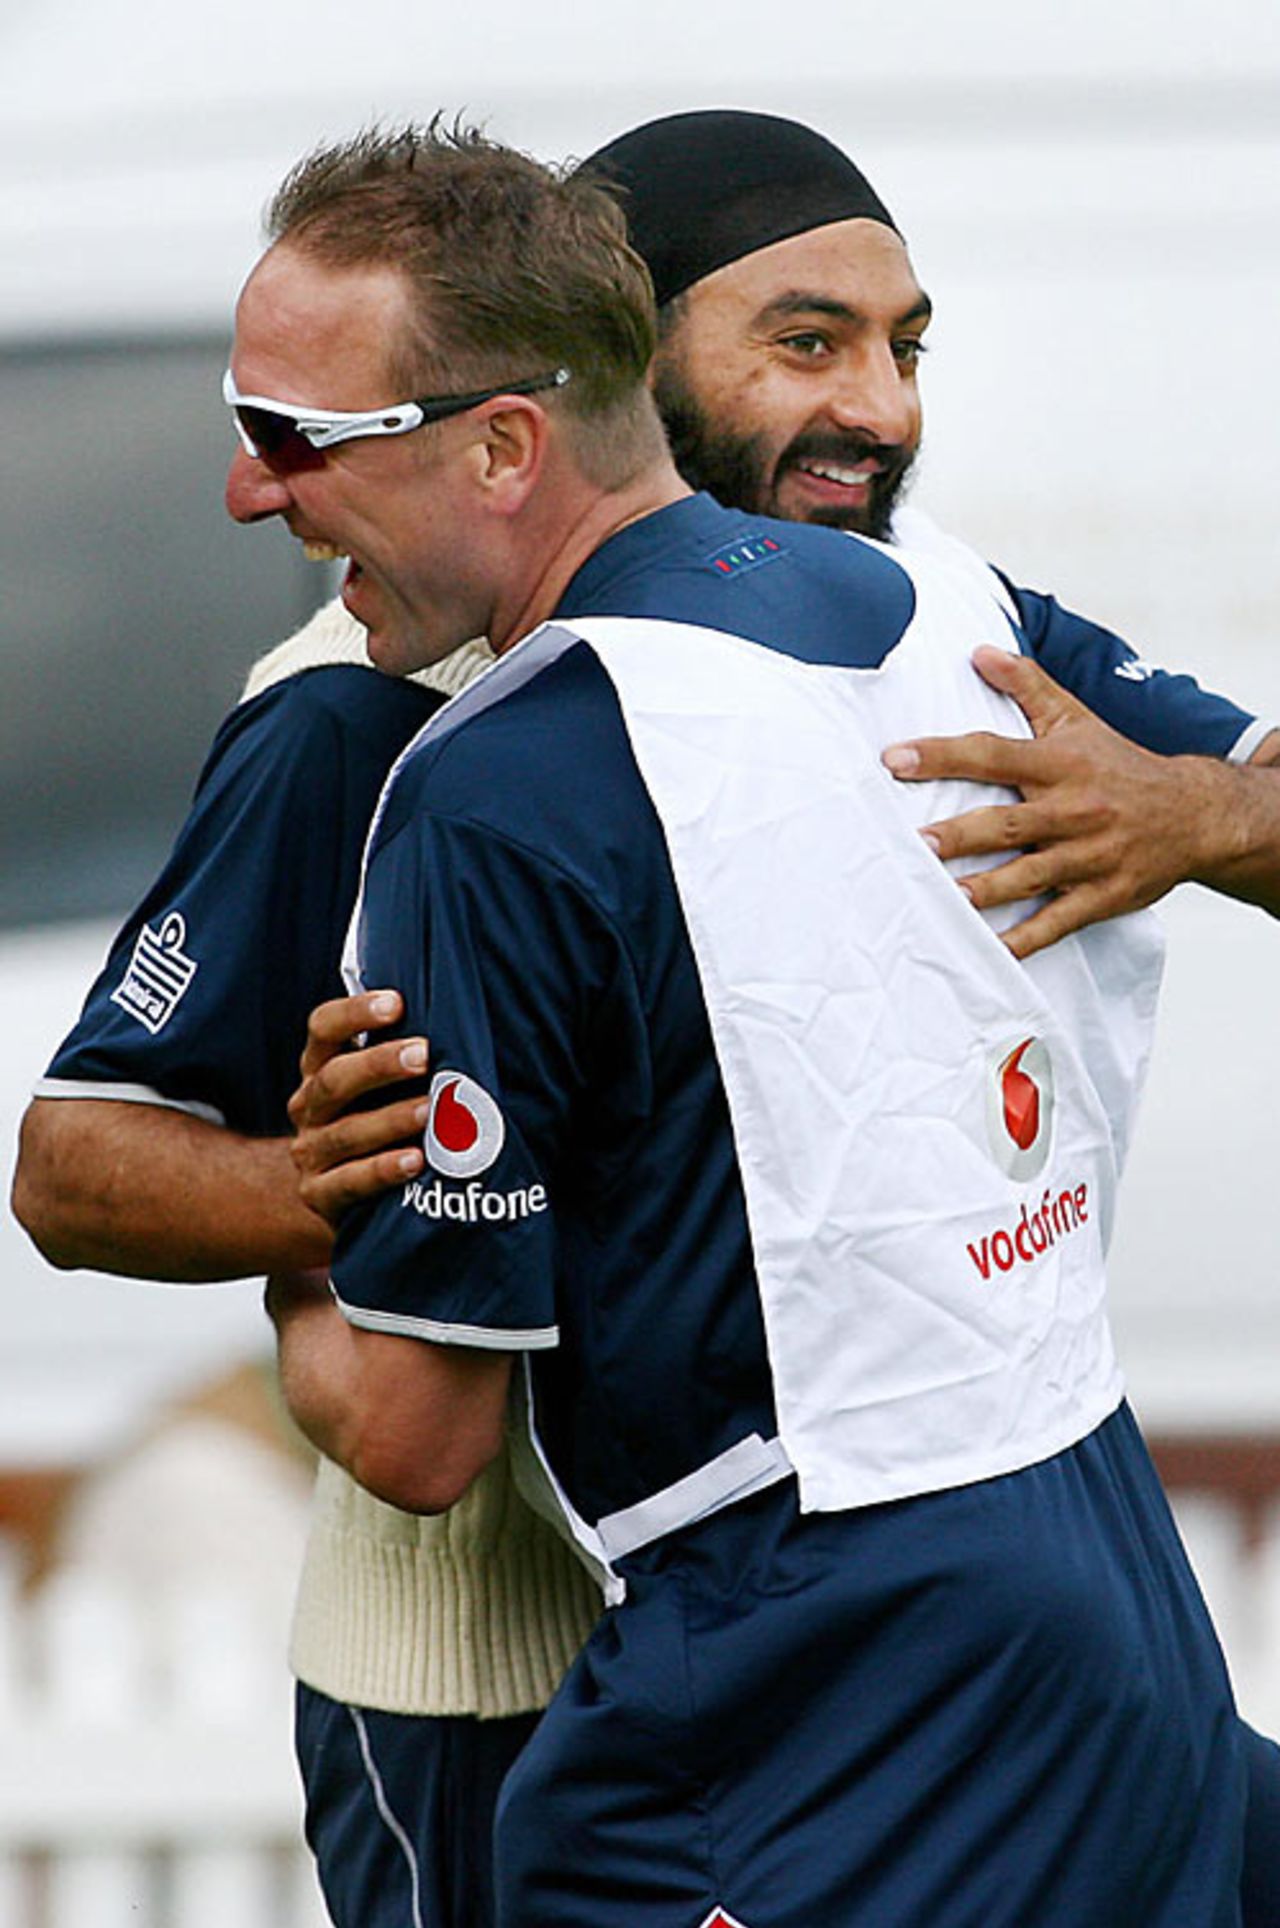 Allan Donald and Monty Panesar lark around during a fielding session, England v India, 1st Test, Lord's, July 18, 2007